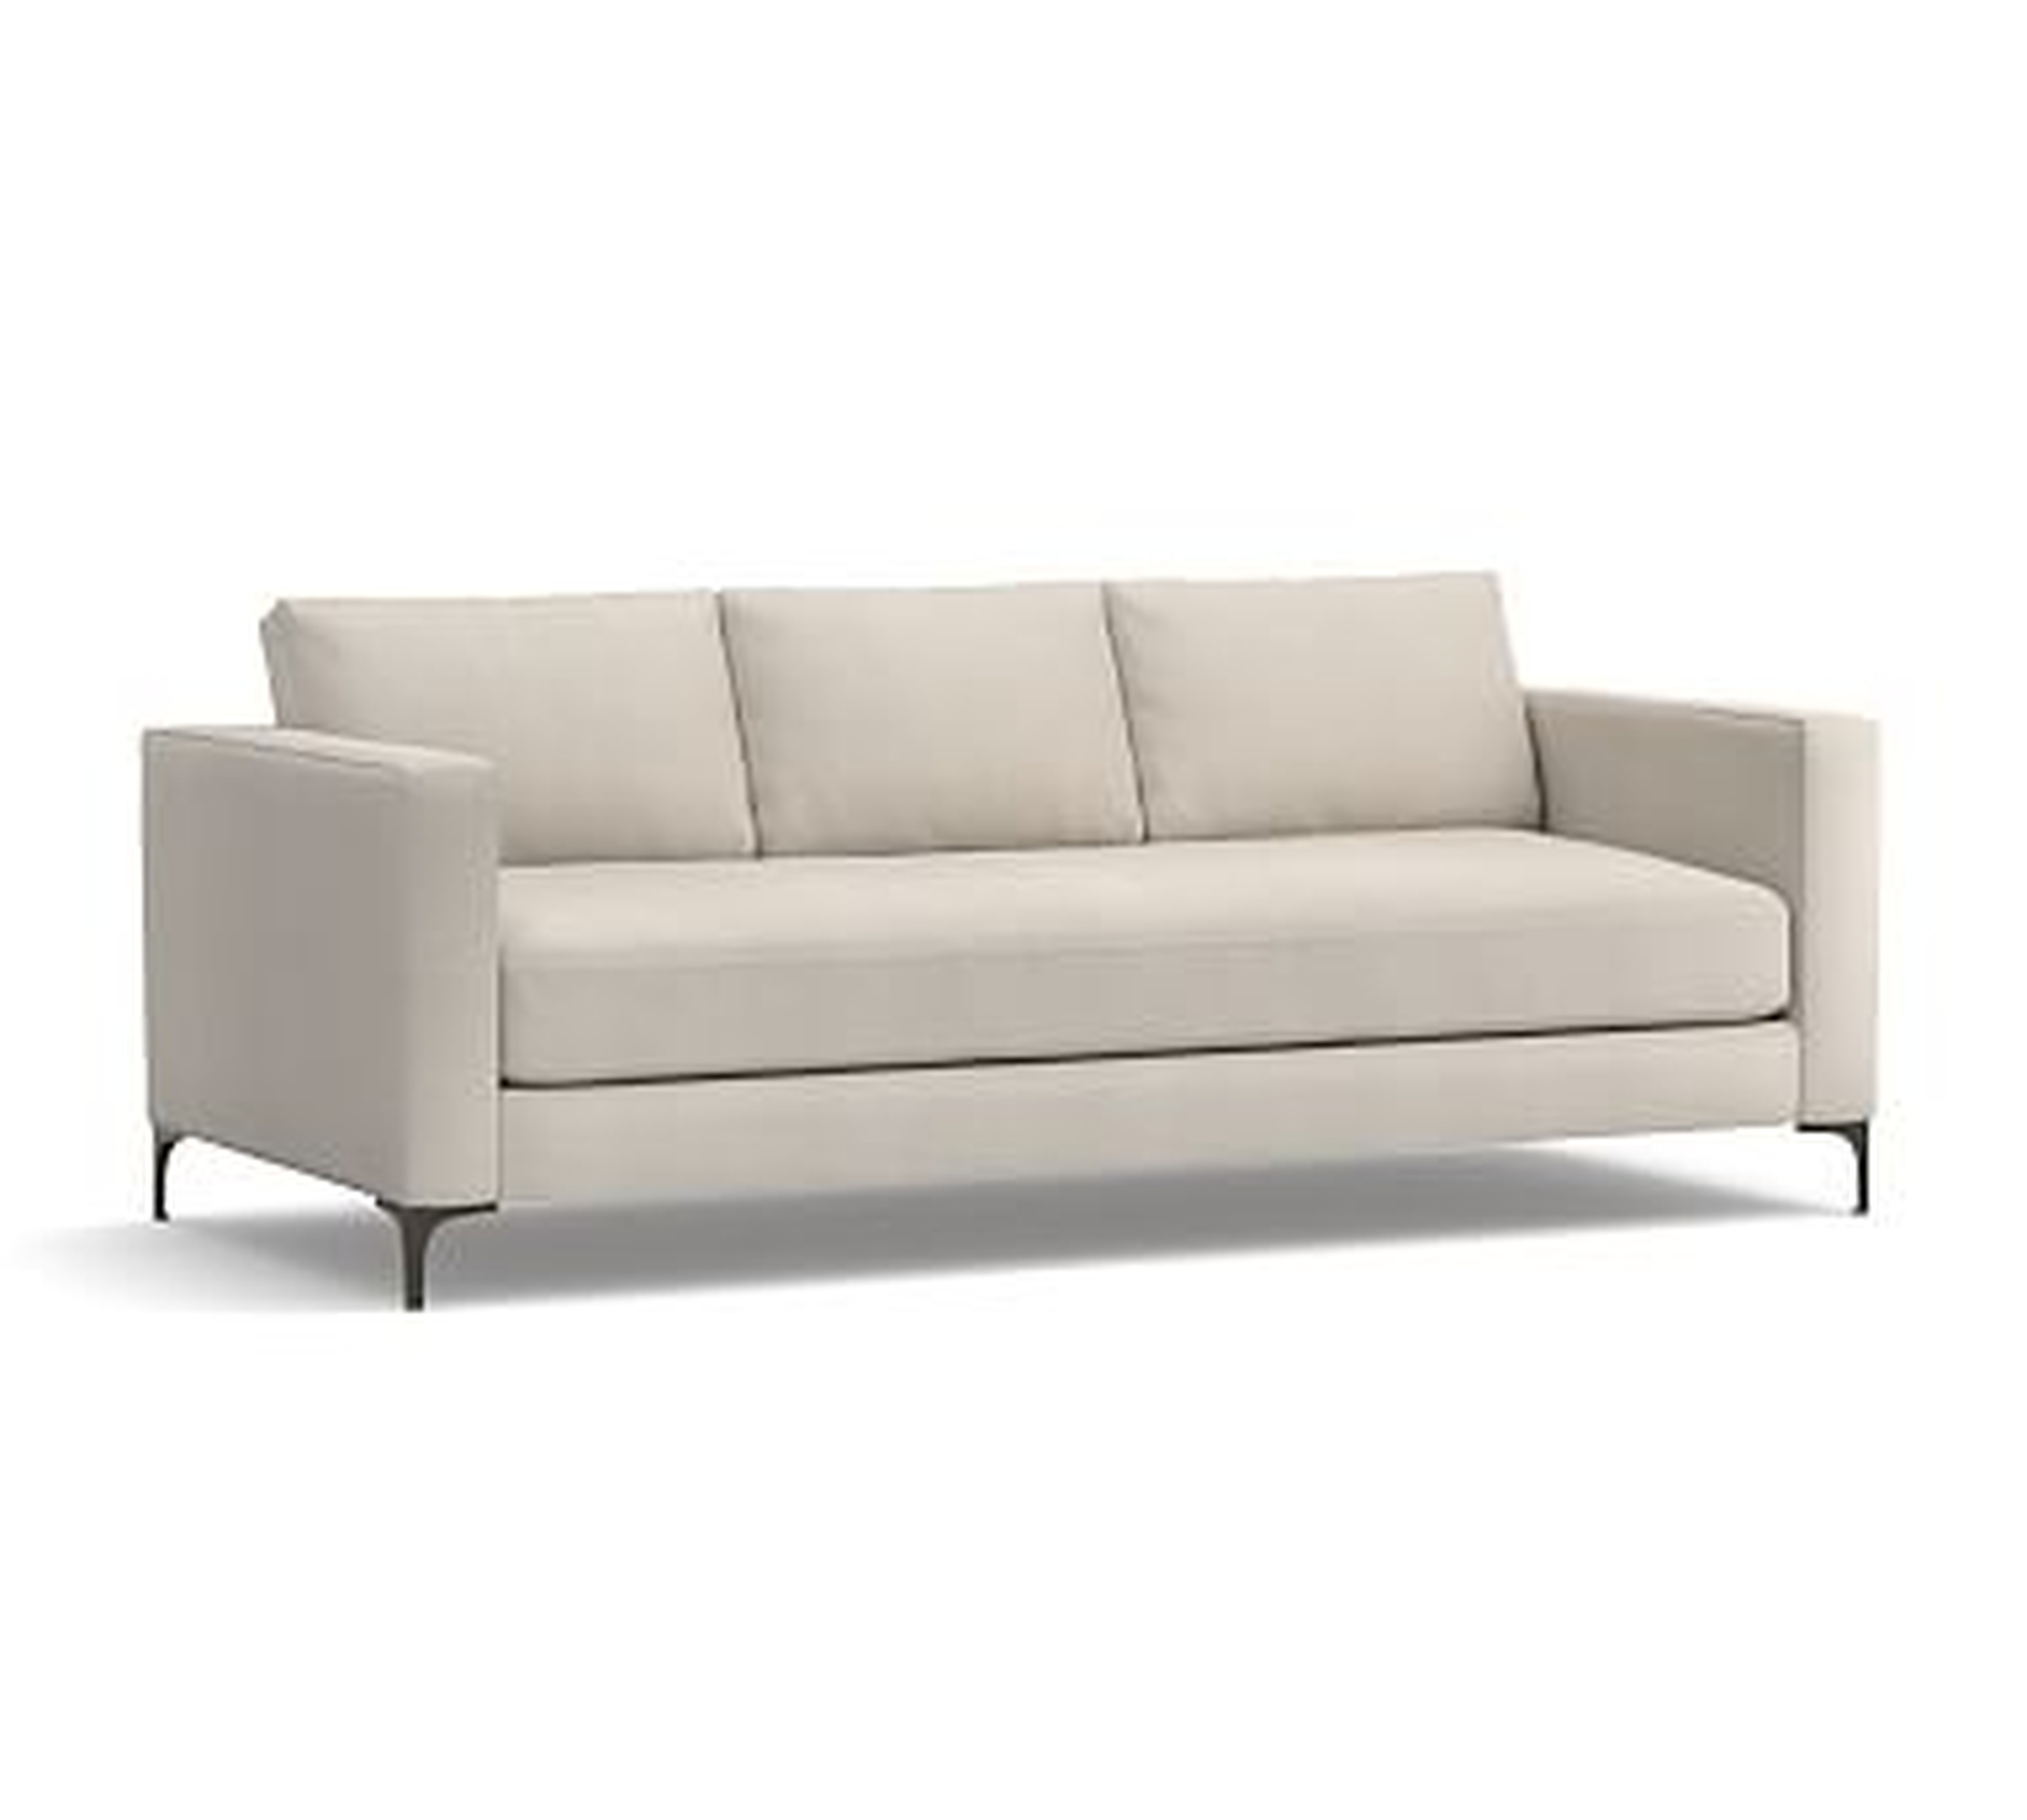 Jake Upholstered Sofa 3x1 86" with Bronze Legs, Standard Cushions, Performance Everydaysuede(TM) Stone - Pottery Barn